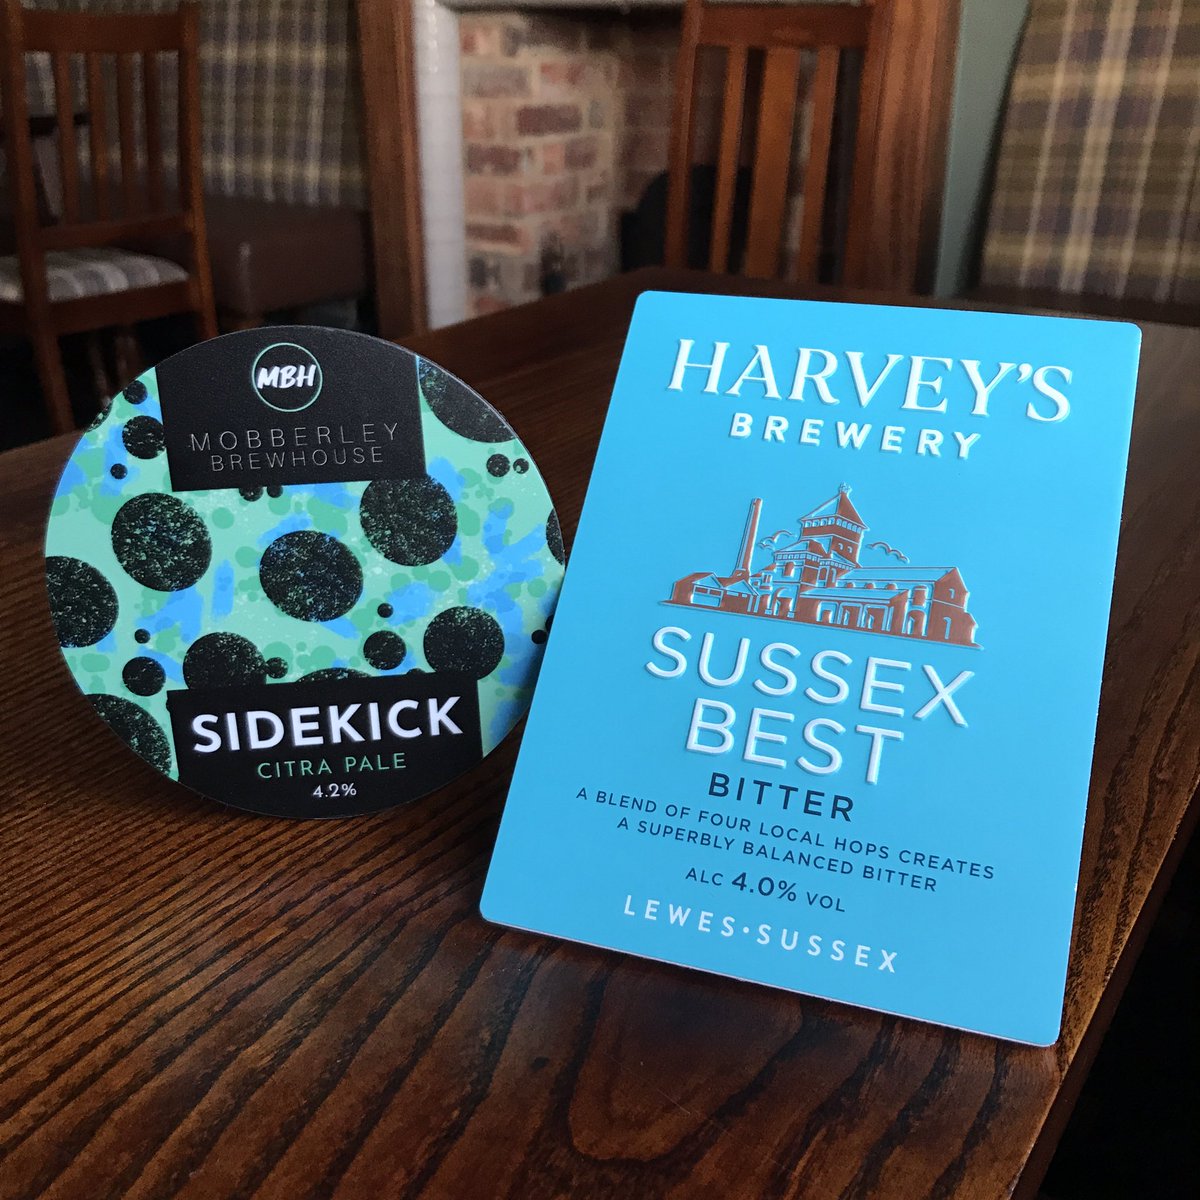 Cask deliveries this week including @mobberleybeer and big thanks to @TheMountingB & @HeatonHops for hooking us up with @Harveys1790 Sussex Best!